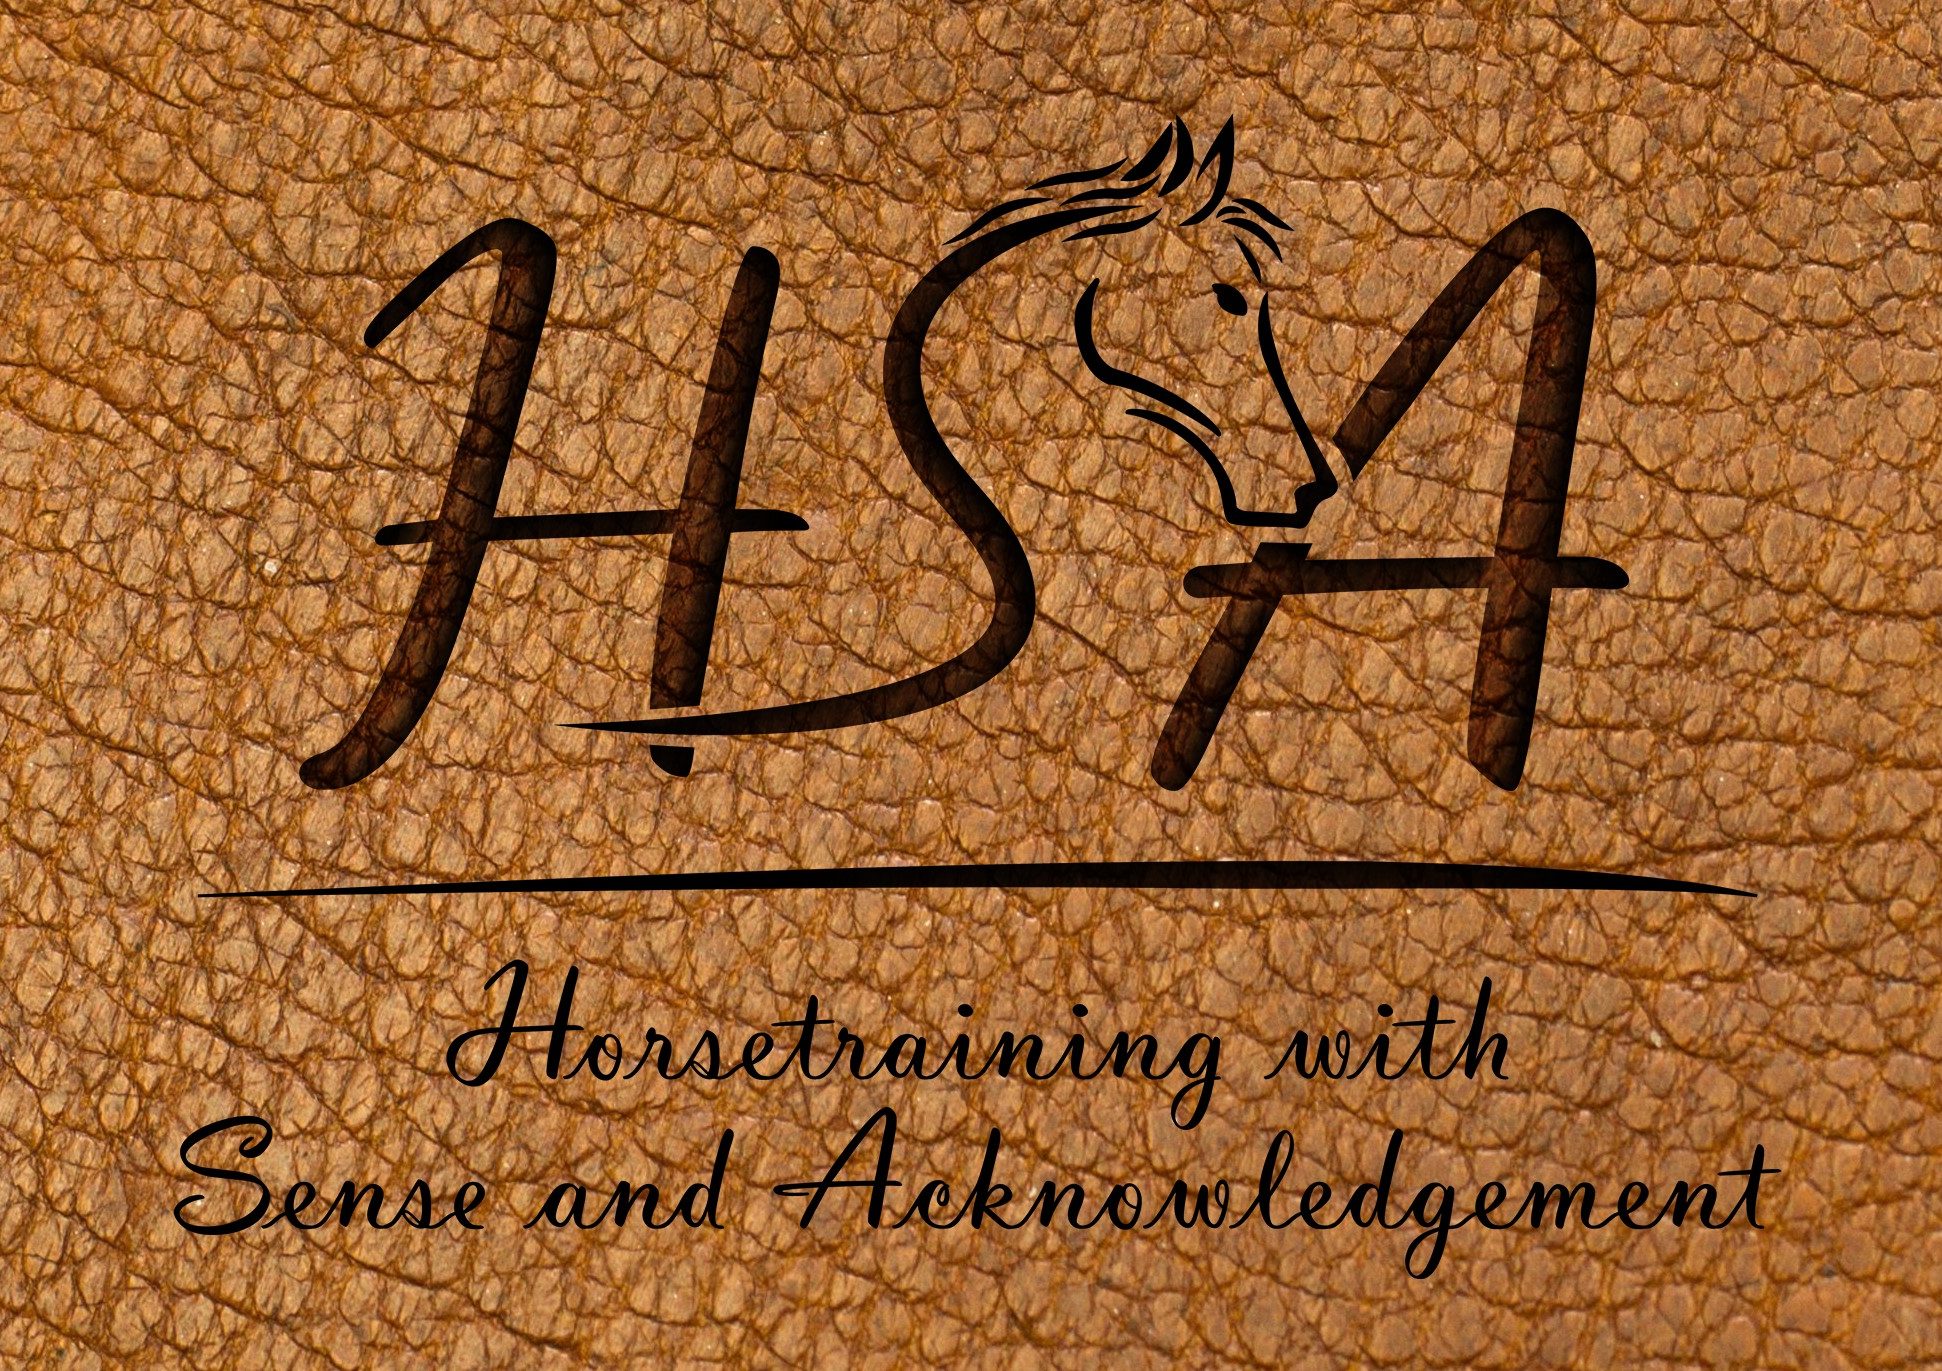 HSA Horsetraining with Sense and Acknowledgement